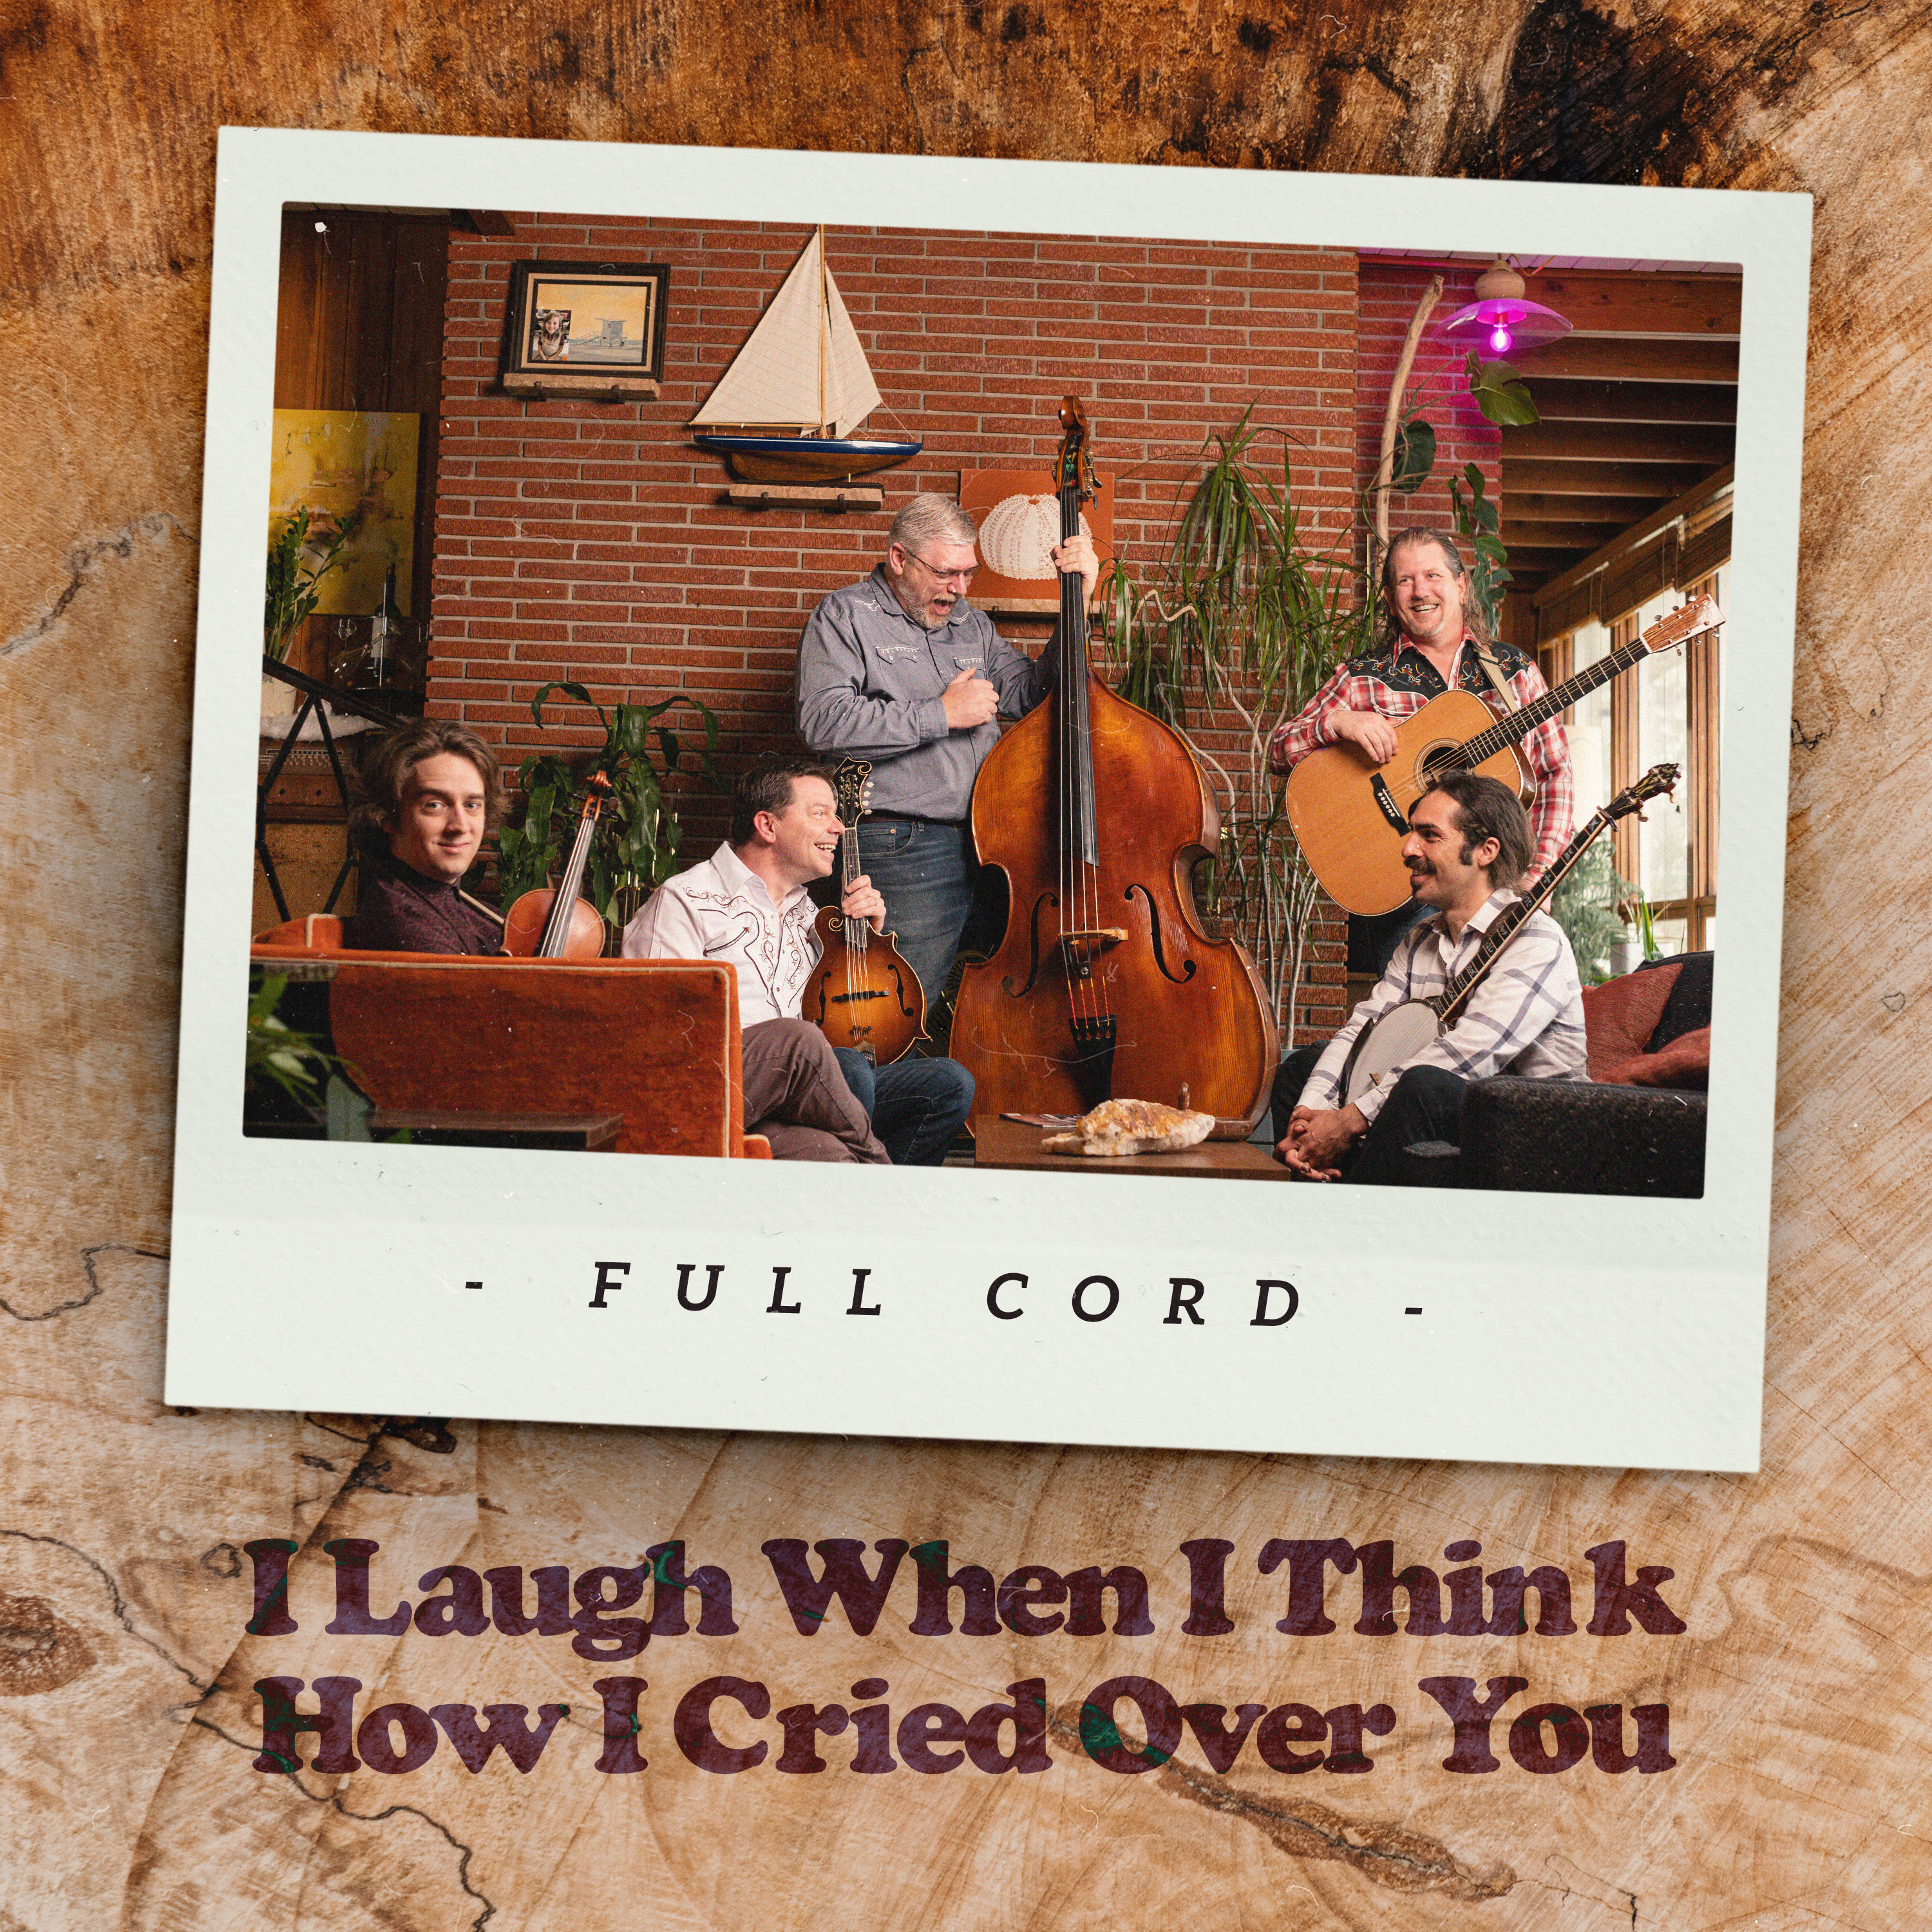 Full Cord releases new single “I Laugh When I Think How I Cried Over You”